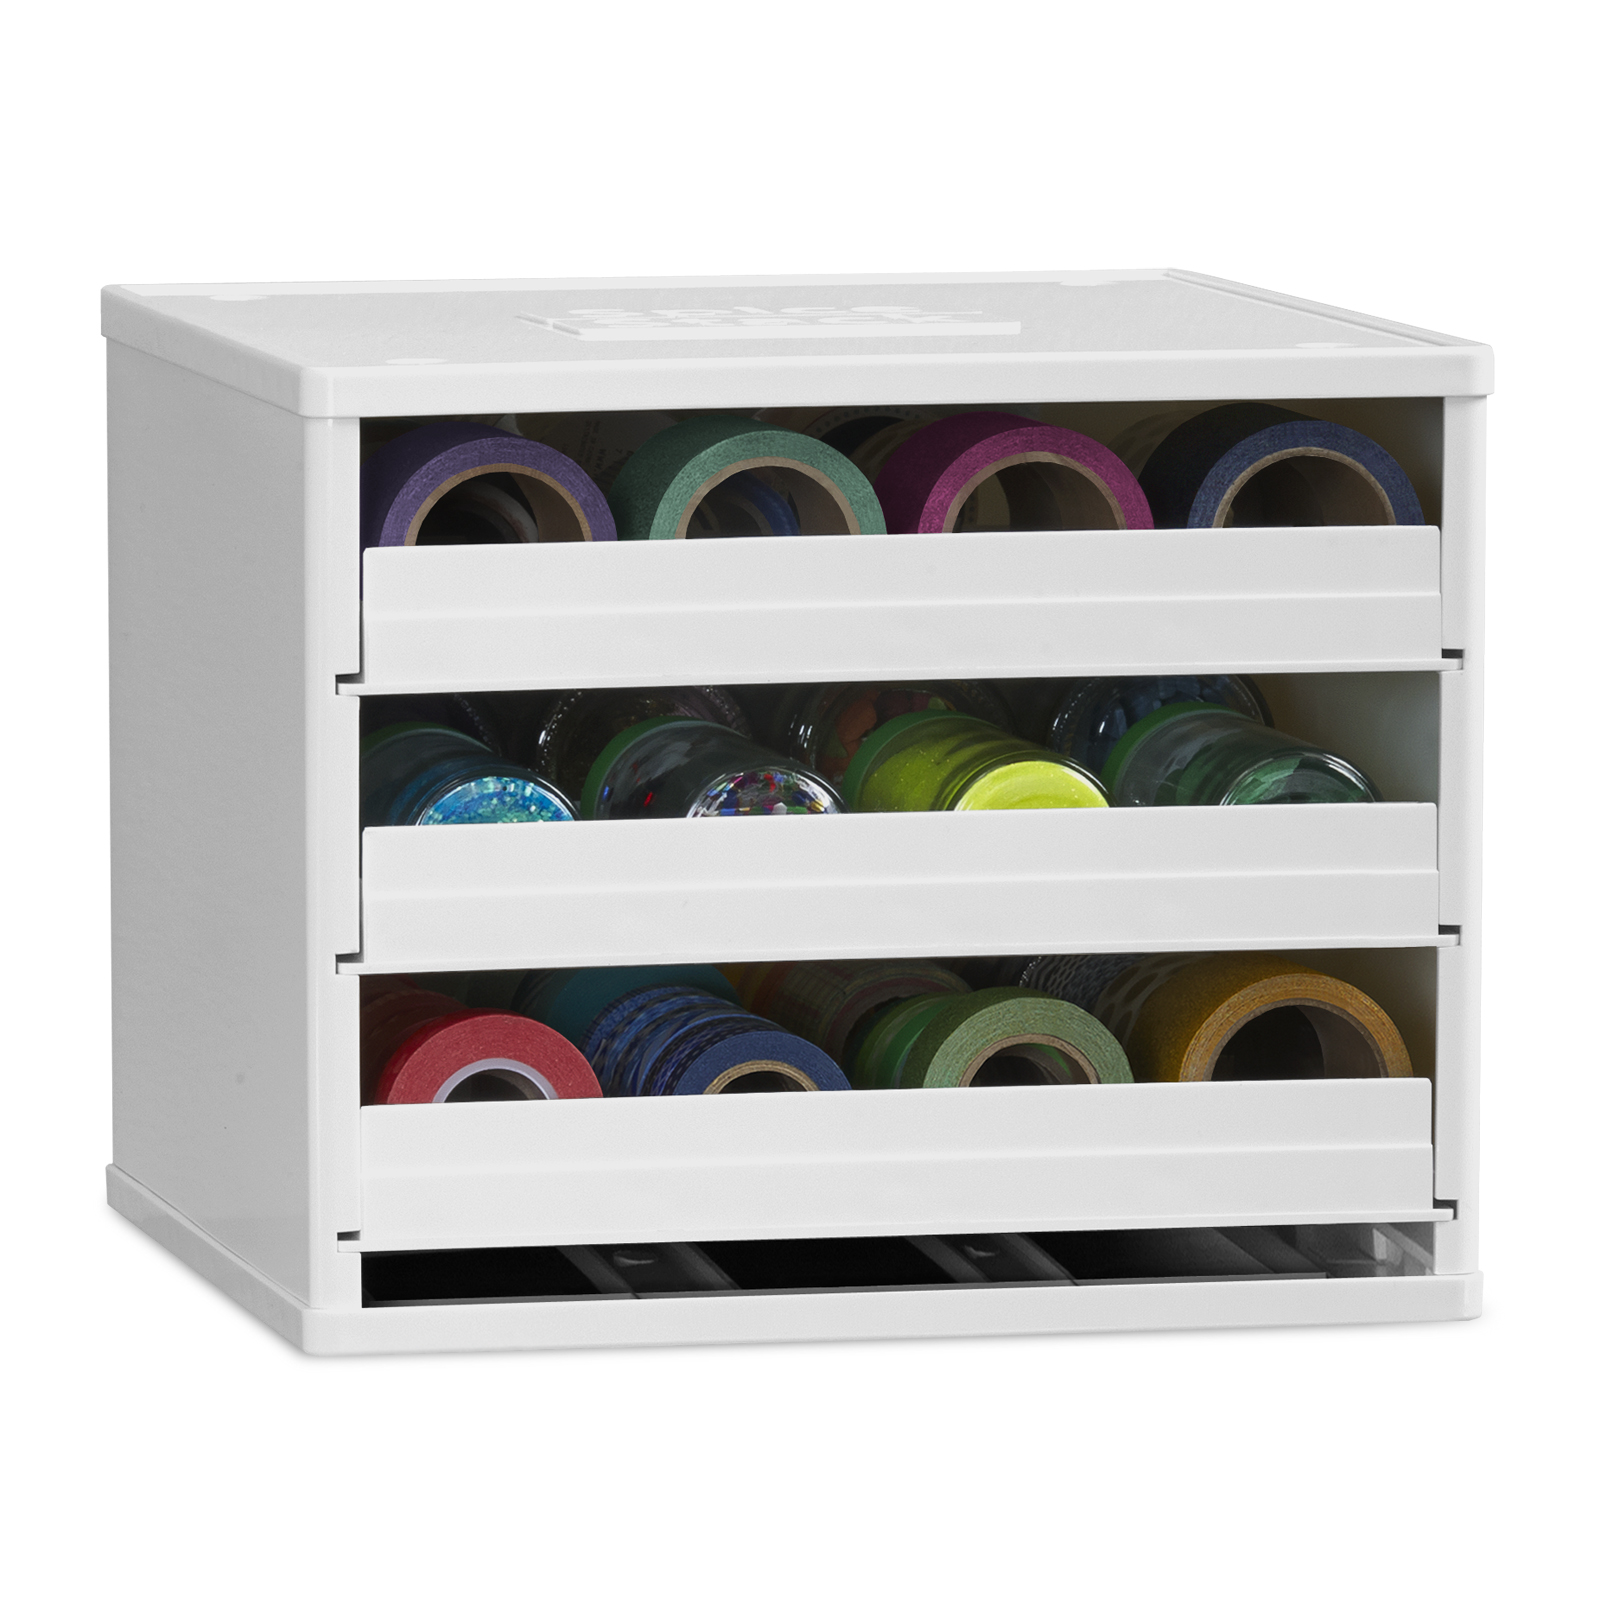 Find the YouCopia® CraftStack™ Classic Organizer at Michaels